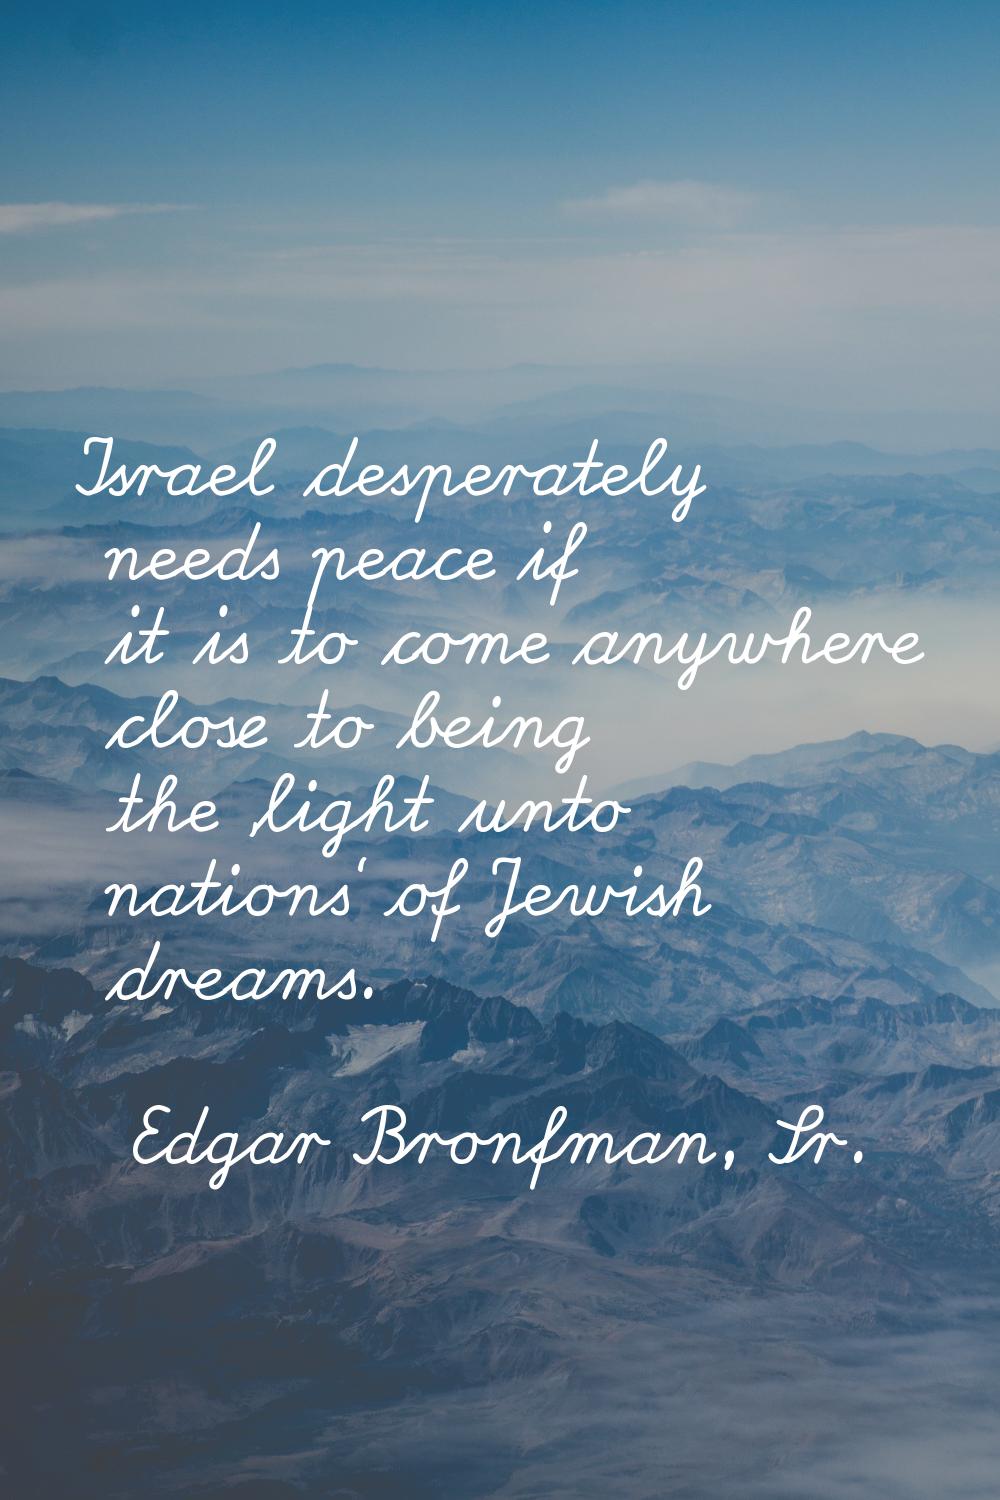 Israel desperately needs peace if it is to come anywhere close to being the 'light unto nations' of